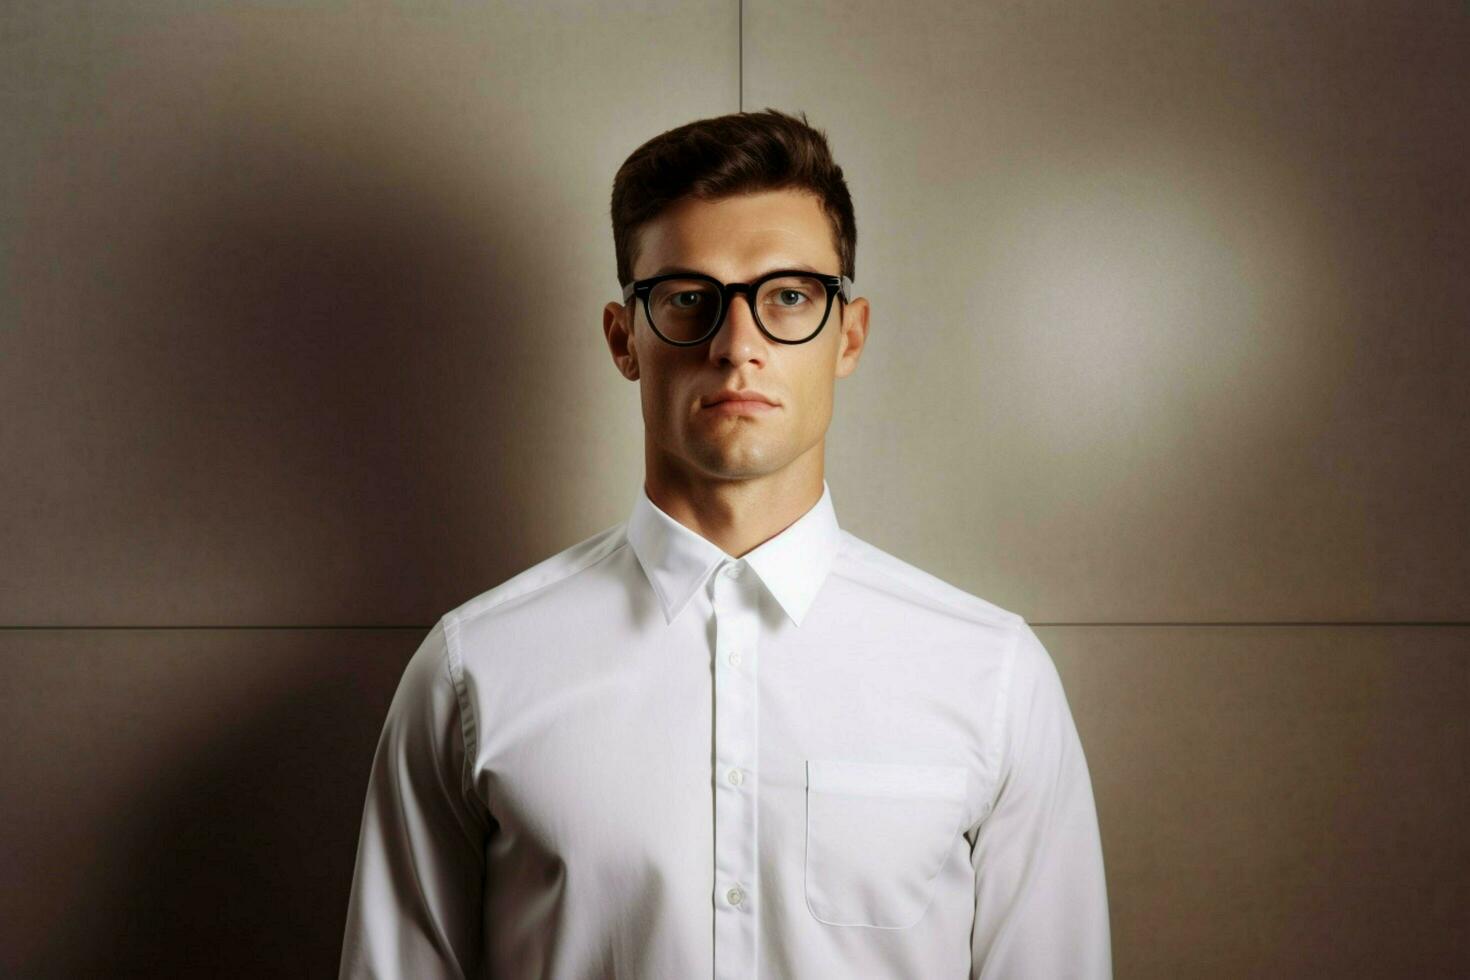 a man in a white shirt with glasses and a shirt t photo